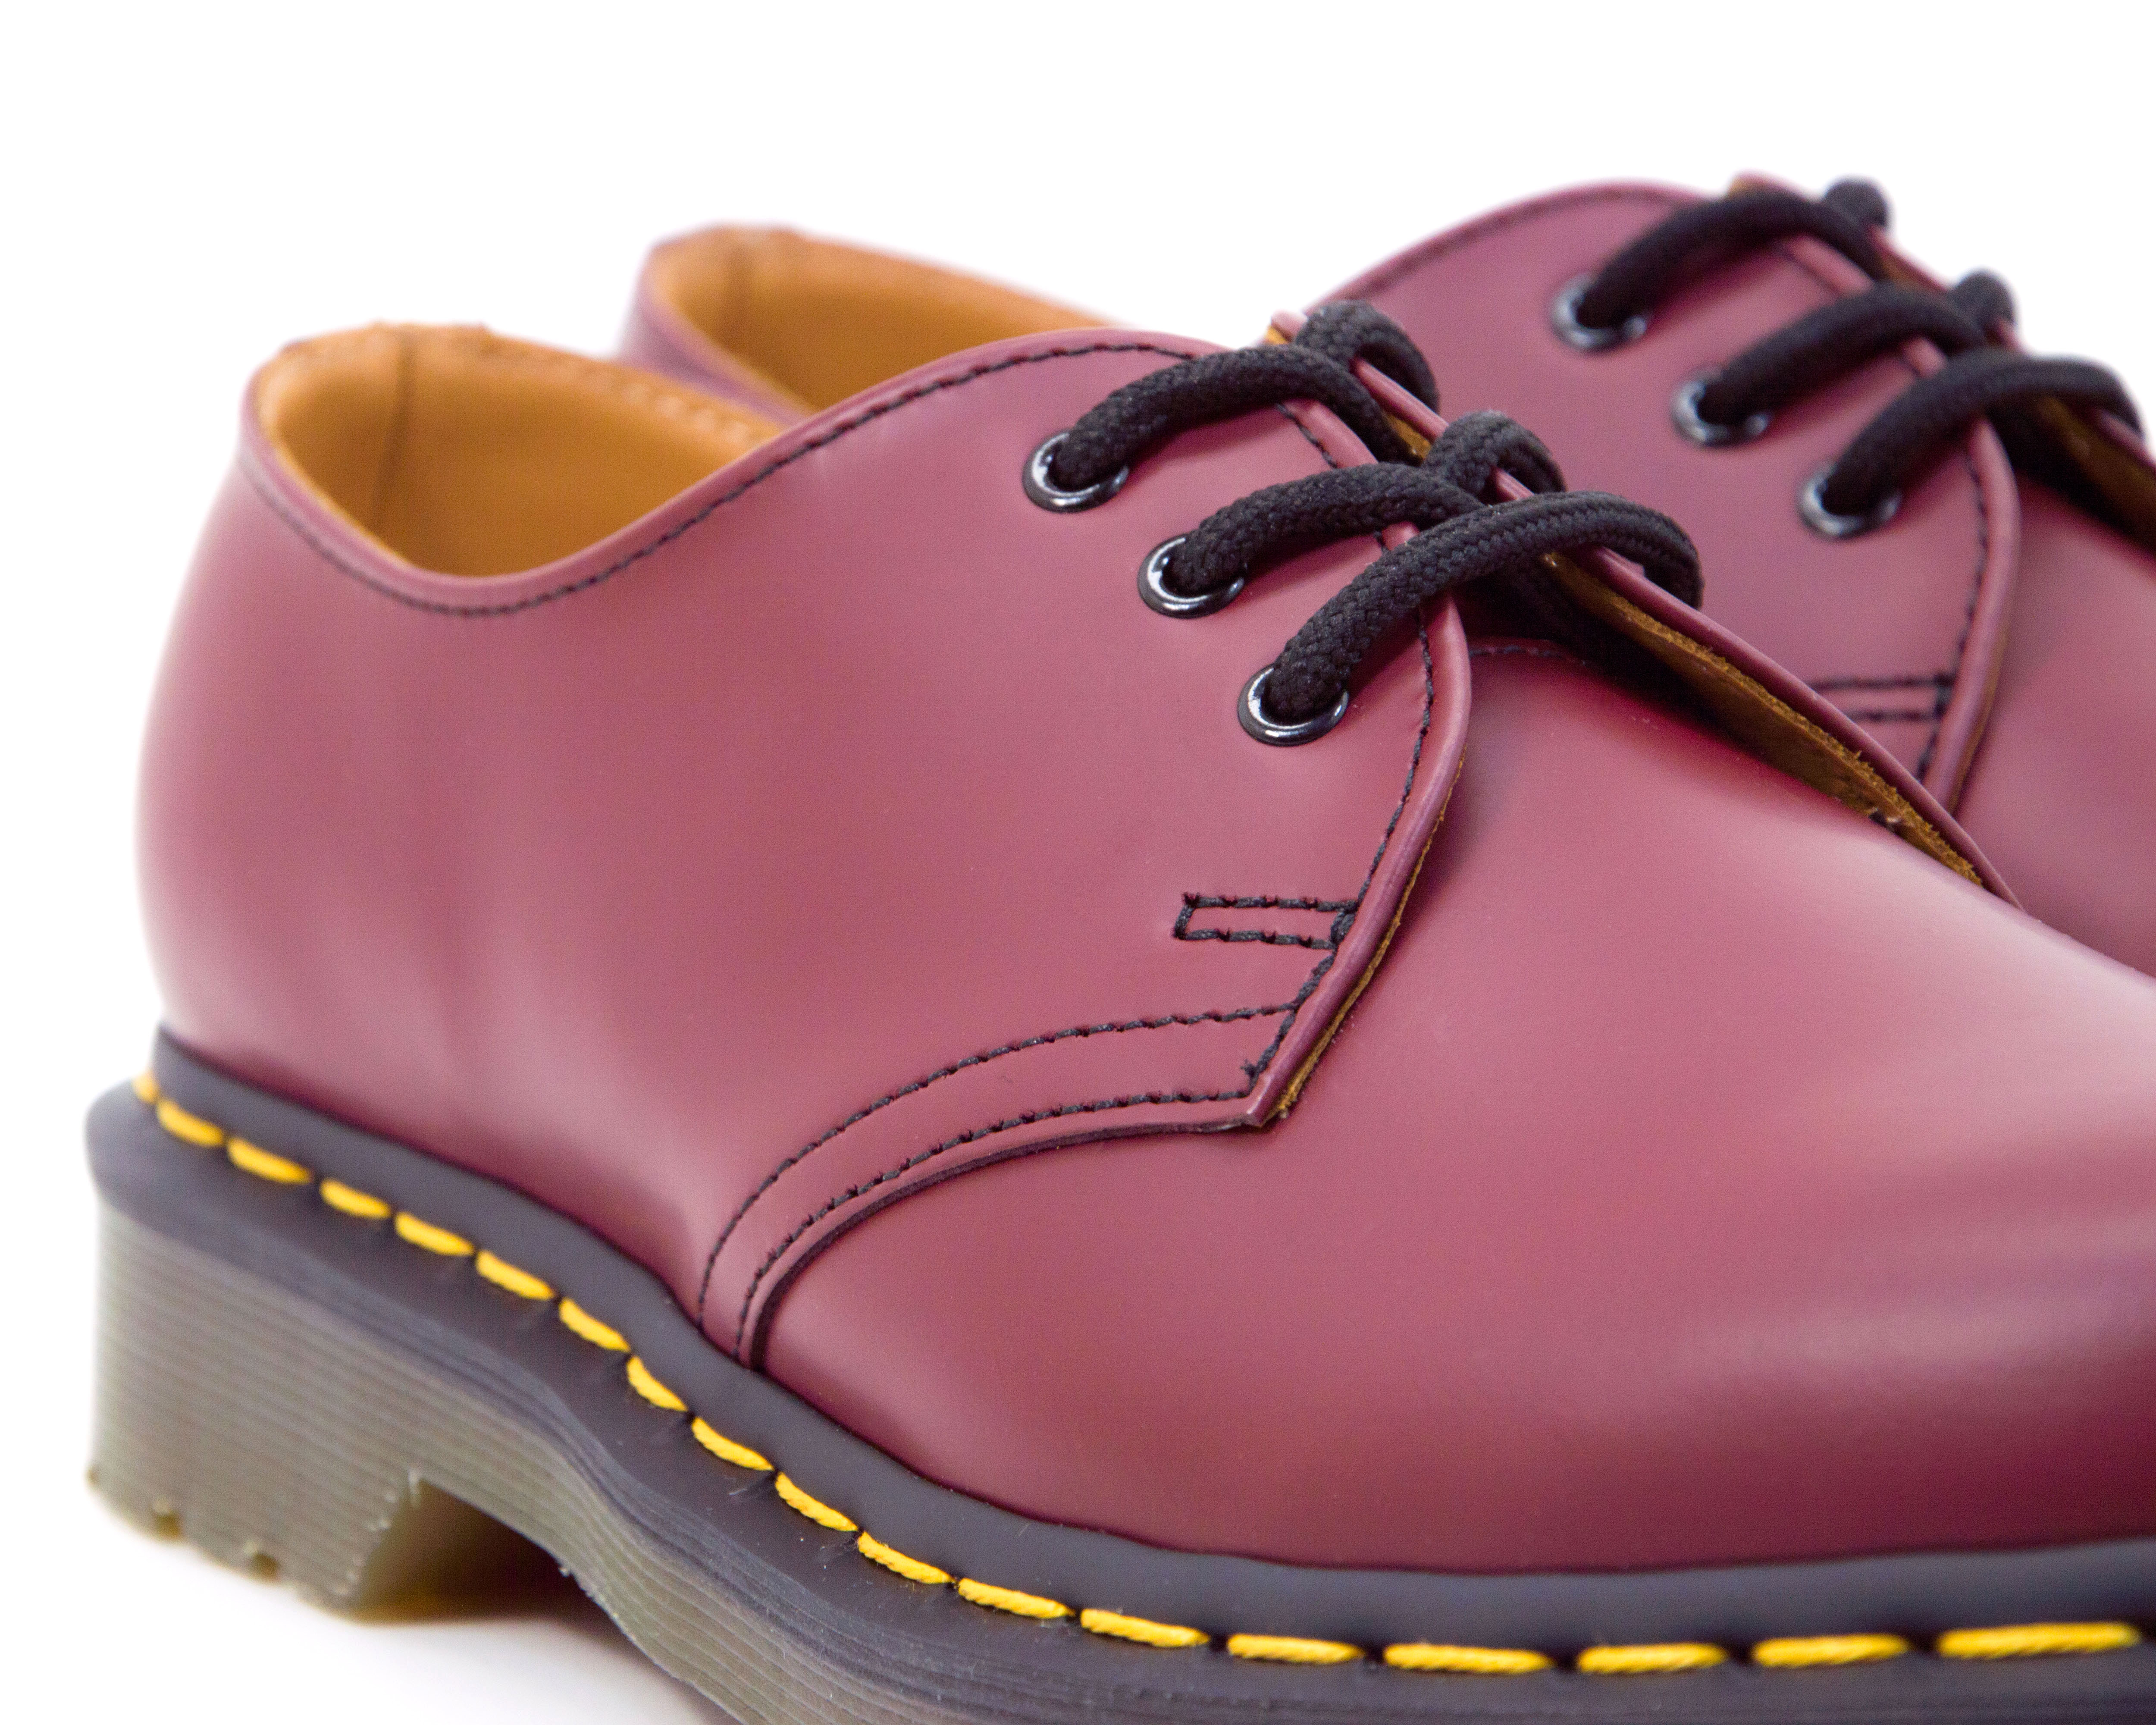 Dr. Martens - 1461 - Cherry Red Smooth